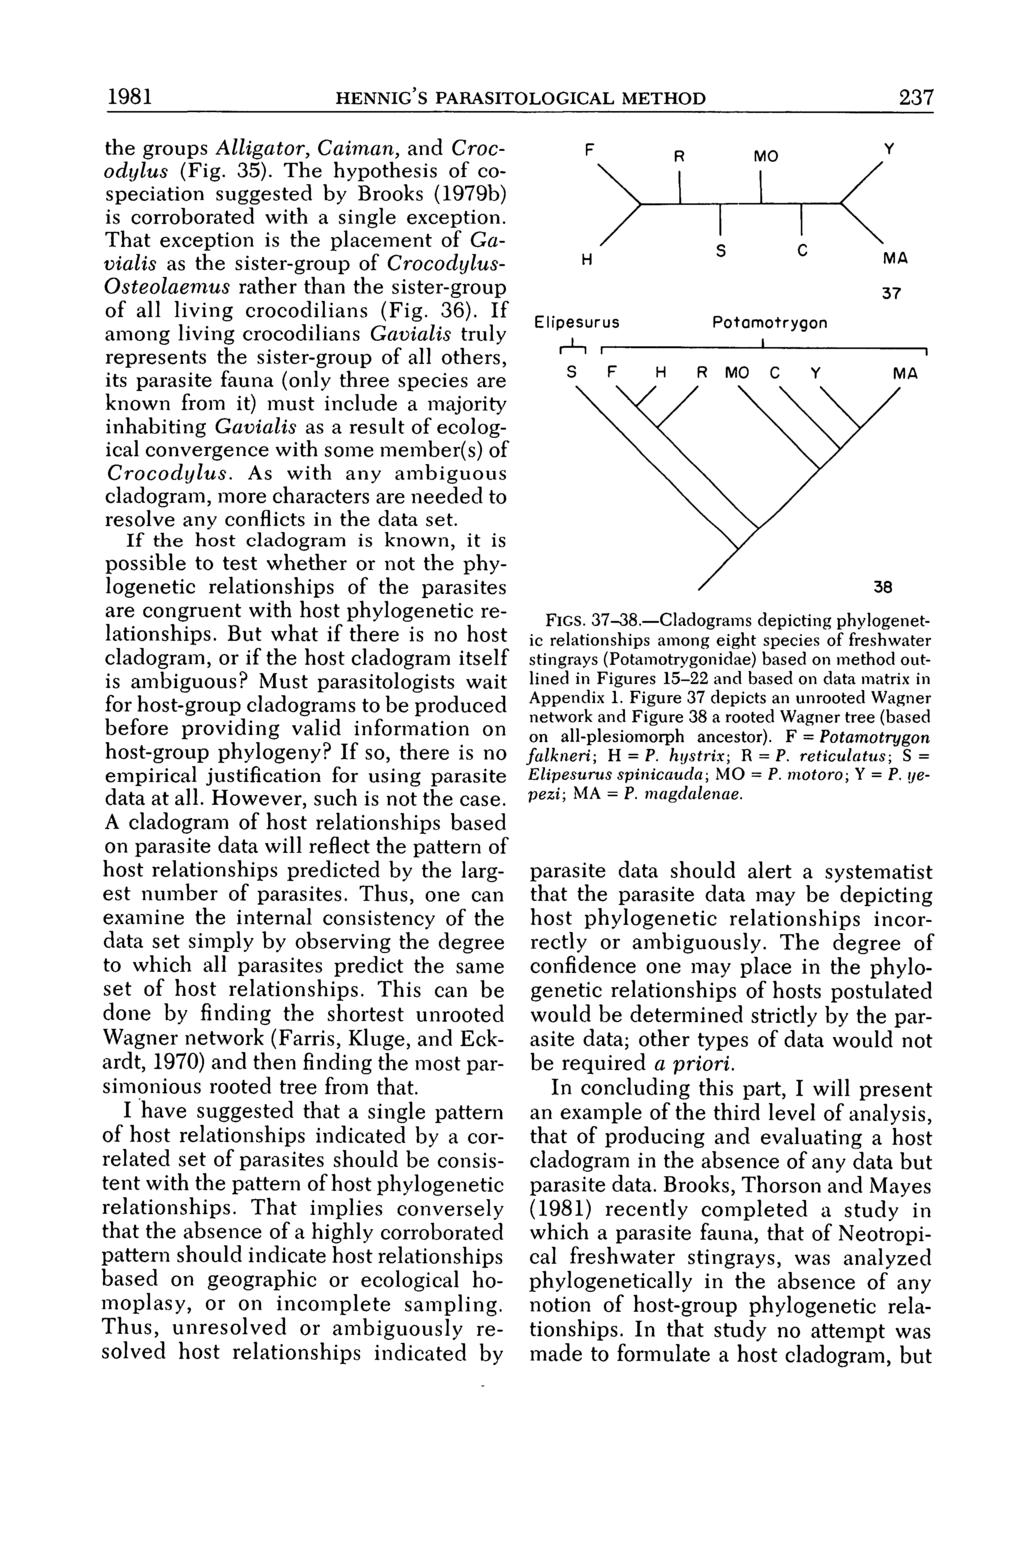 98 HENNIG S PARASITOLOGICAL METHOD 237 the groups Alligator, Caiman, and Crocodylus (Fig. 35). The hypothesis of cospeciation suggested by Brooks (979b) is corroborated with a single exception.